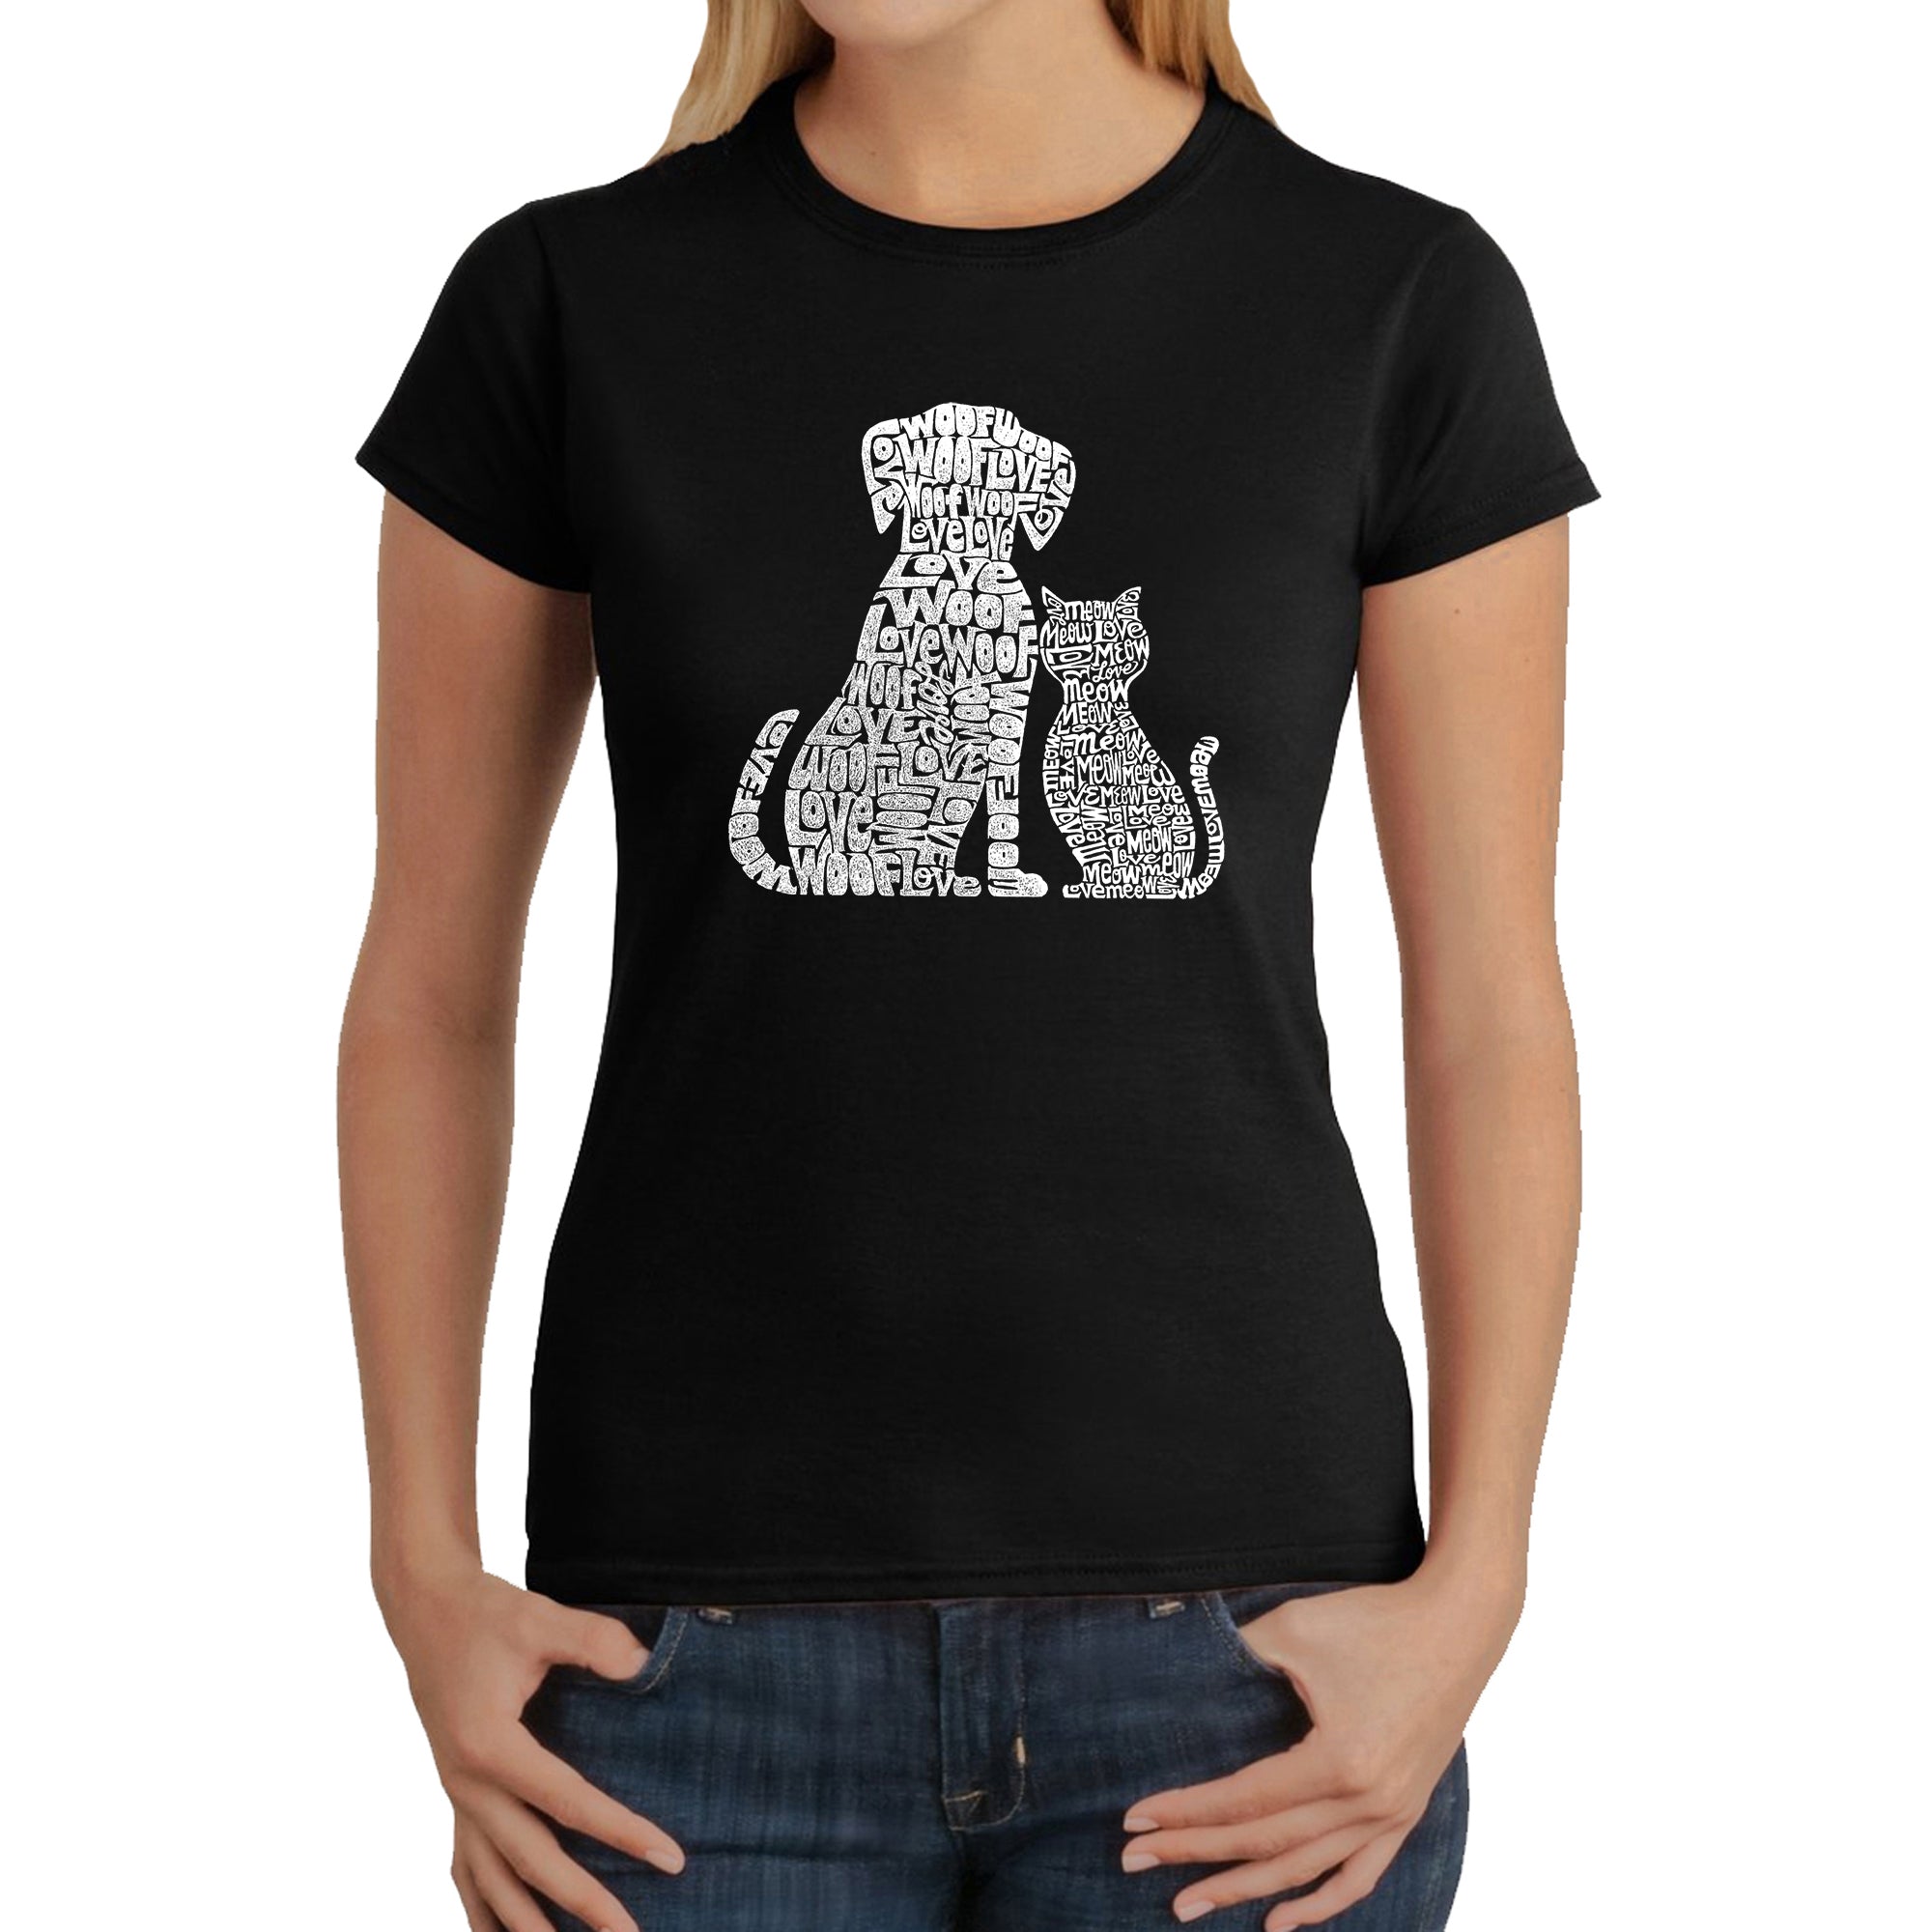 Dogs And Cats - Women's Word Art T-Shirt - Navy - XX-Large